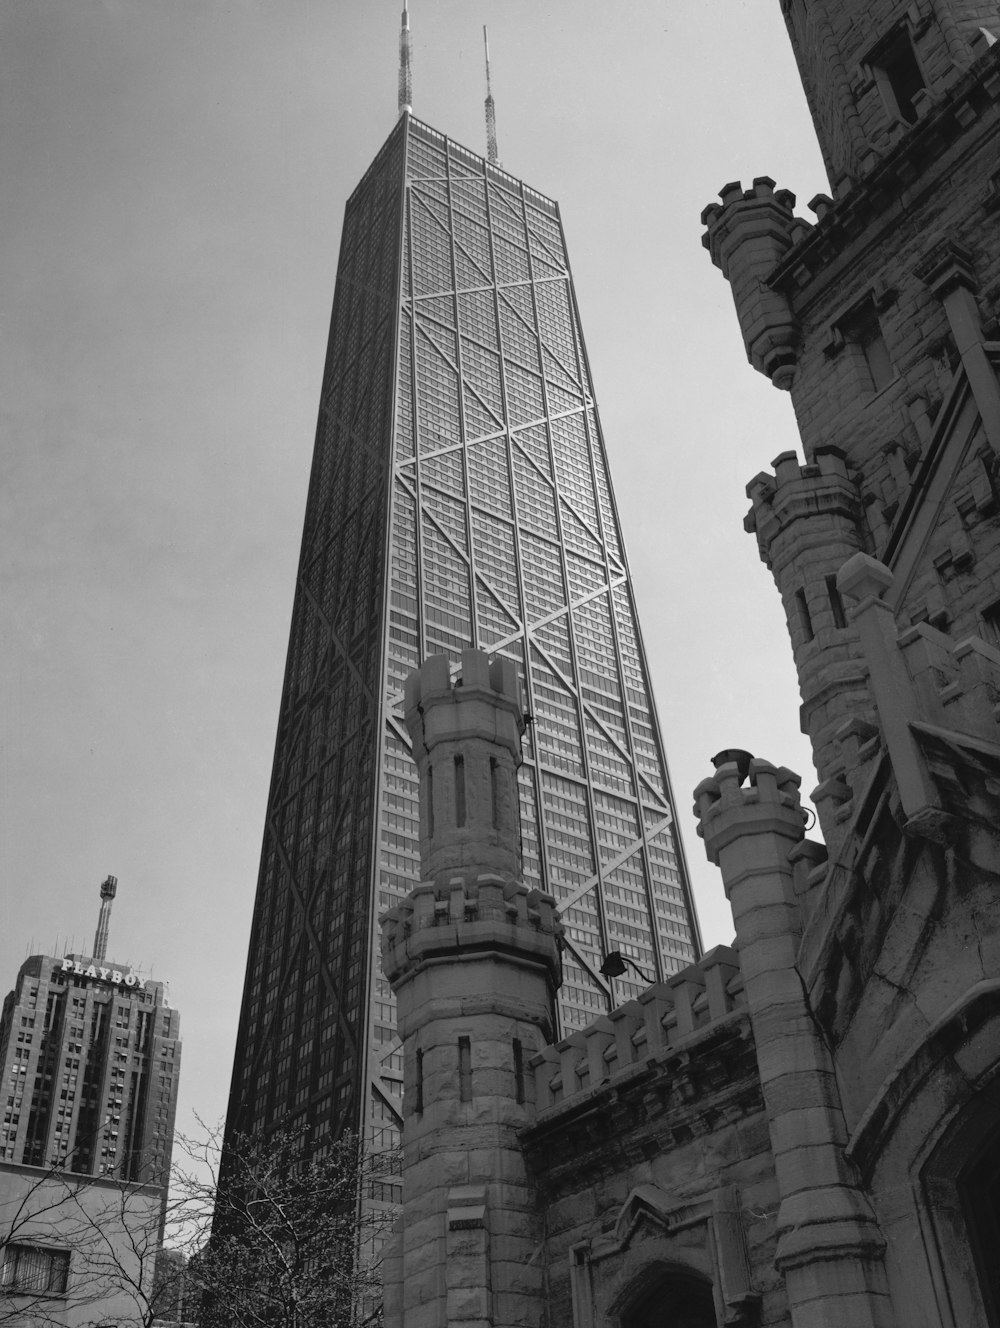 John Hancock Center Summary Photograph shows John Hancock Center designed by Bruce Graham for Skidmore, Owings & Merrill framed by old Water Tower, Chicago, Illinois